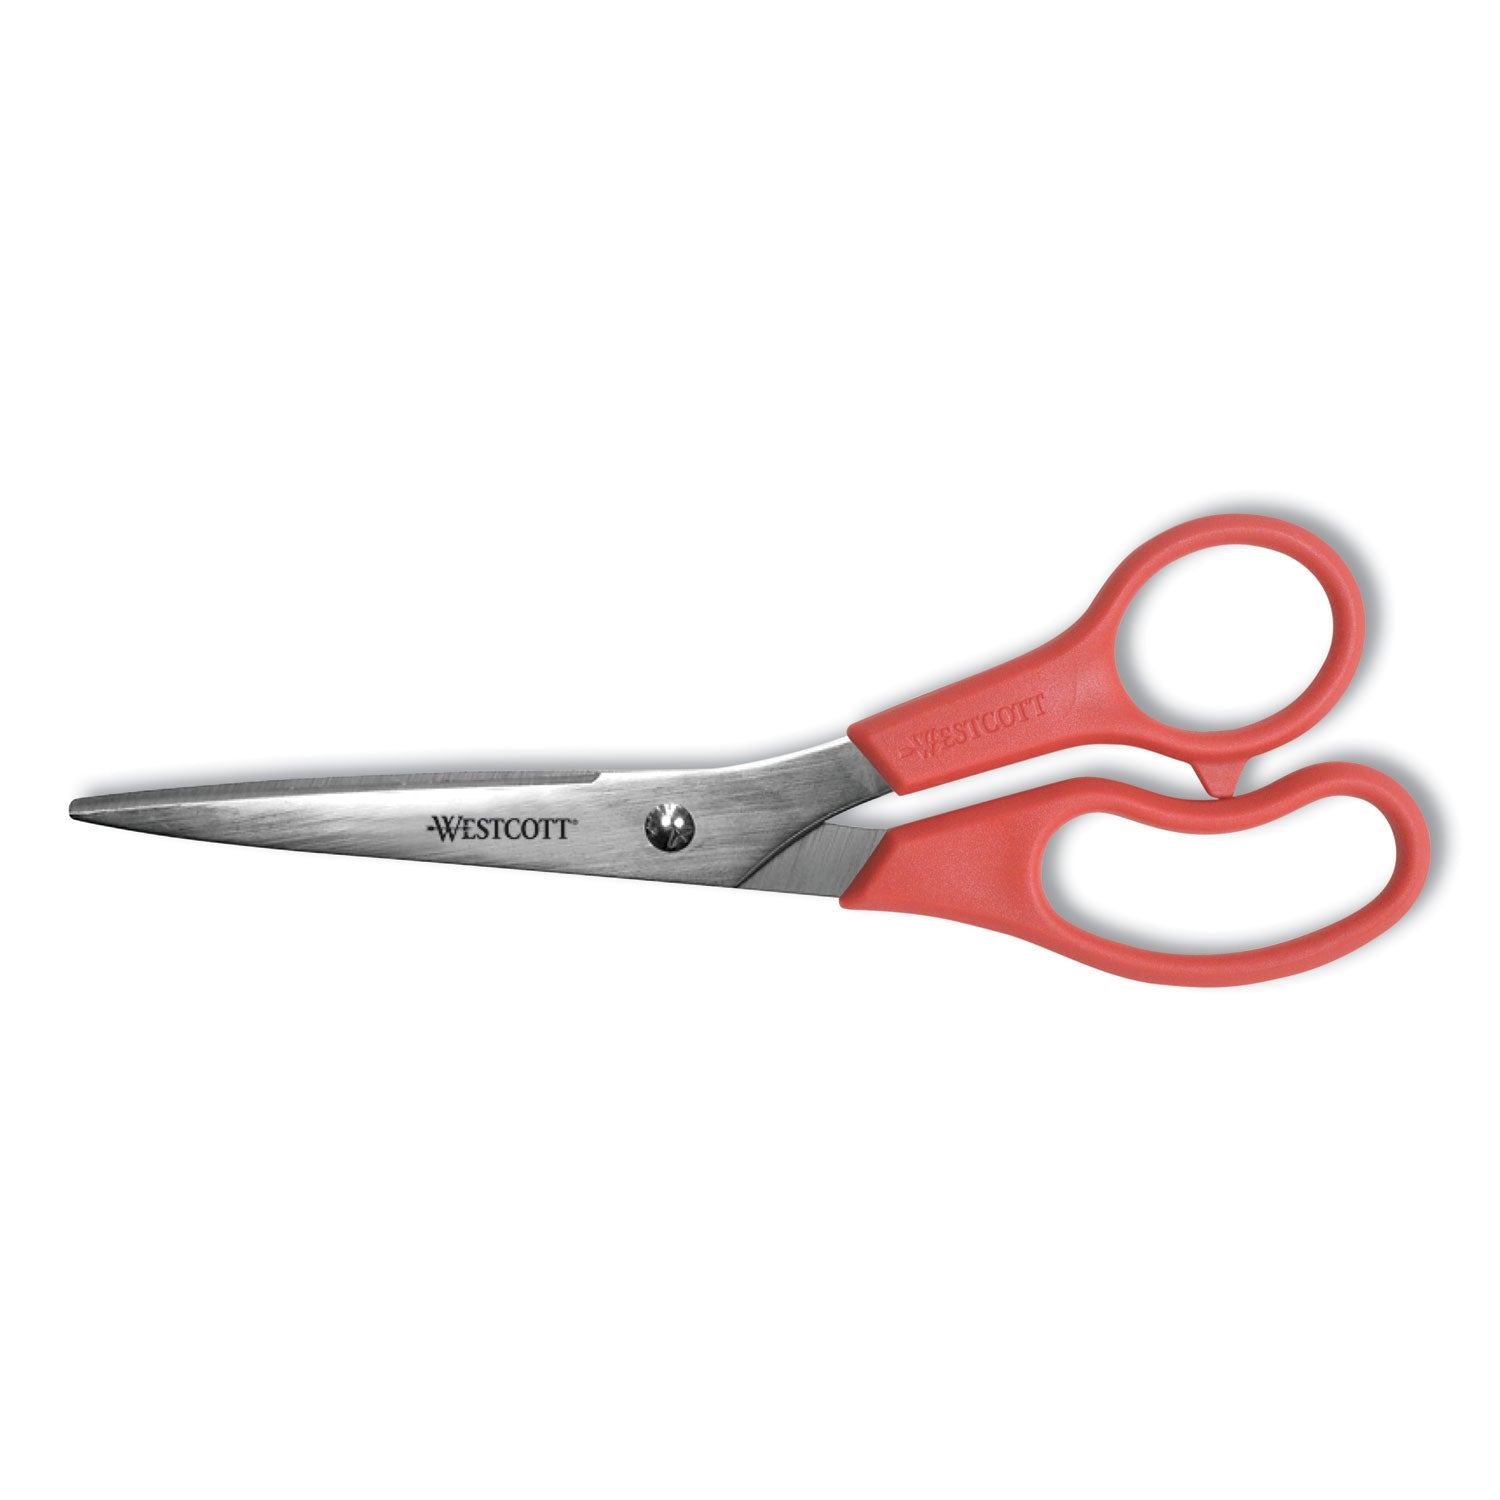 Value Line Stainless Steel Shears, 8" Long, 3.5" Cut Length, Red Straight Handle - 